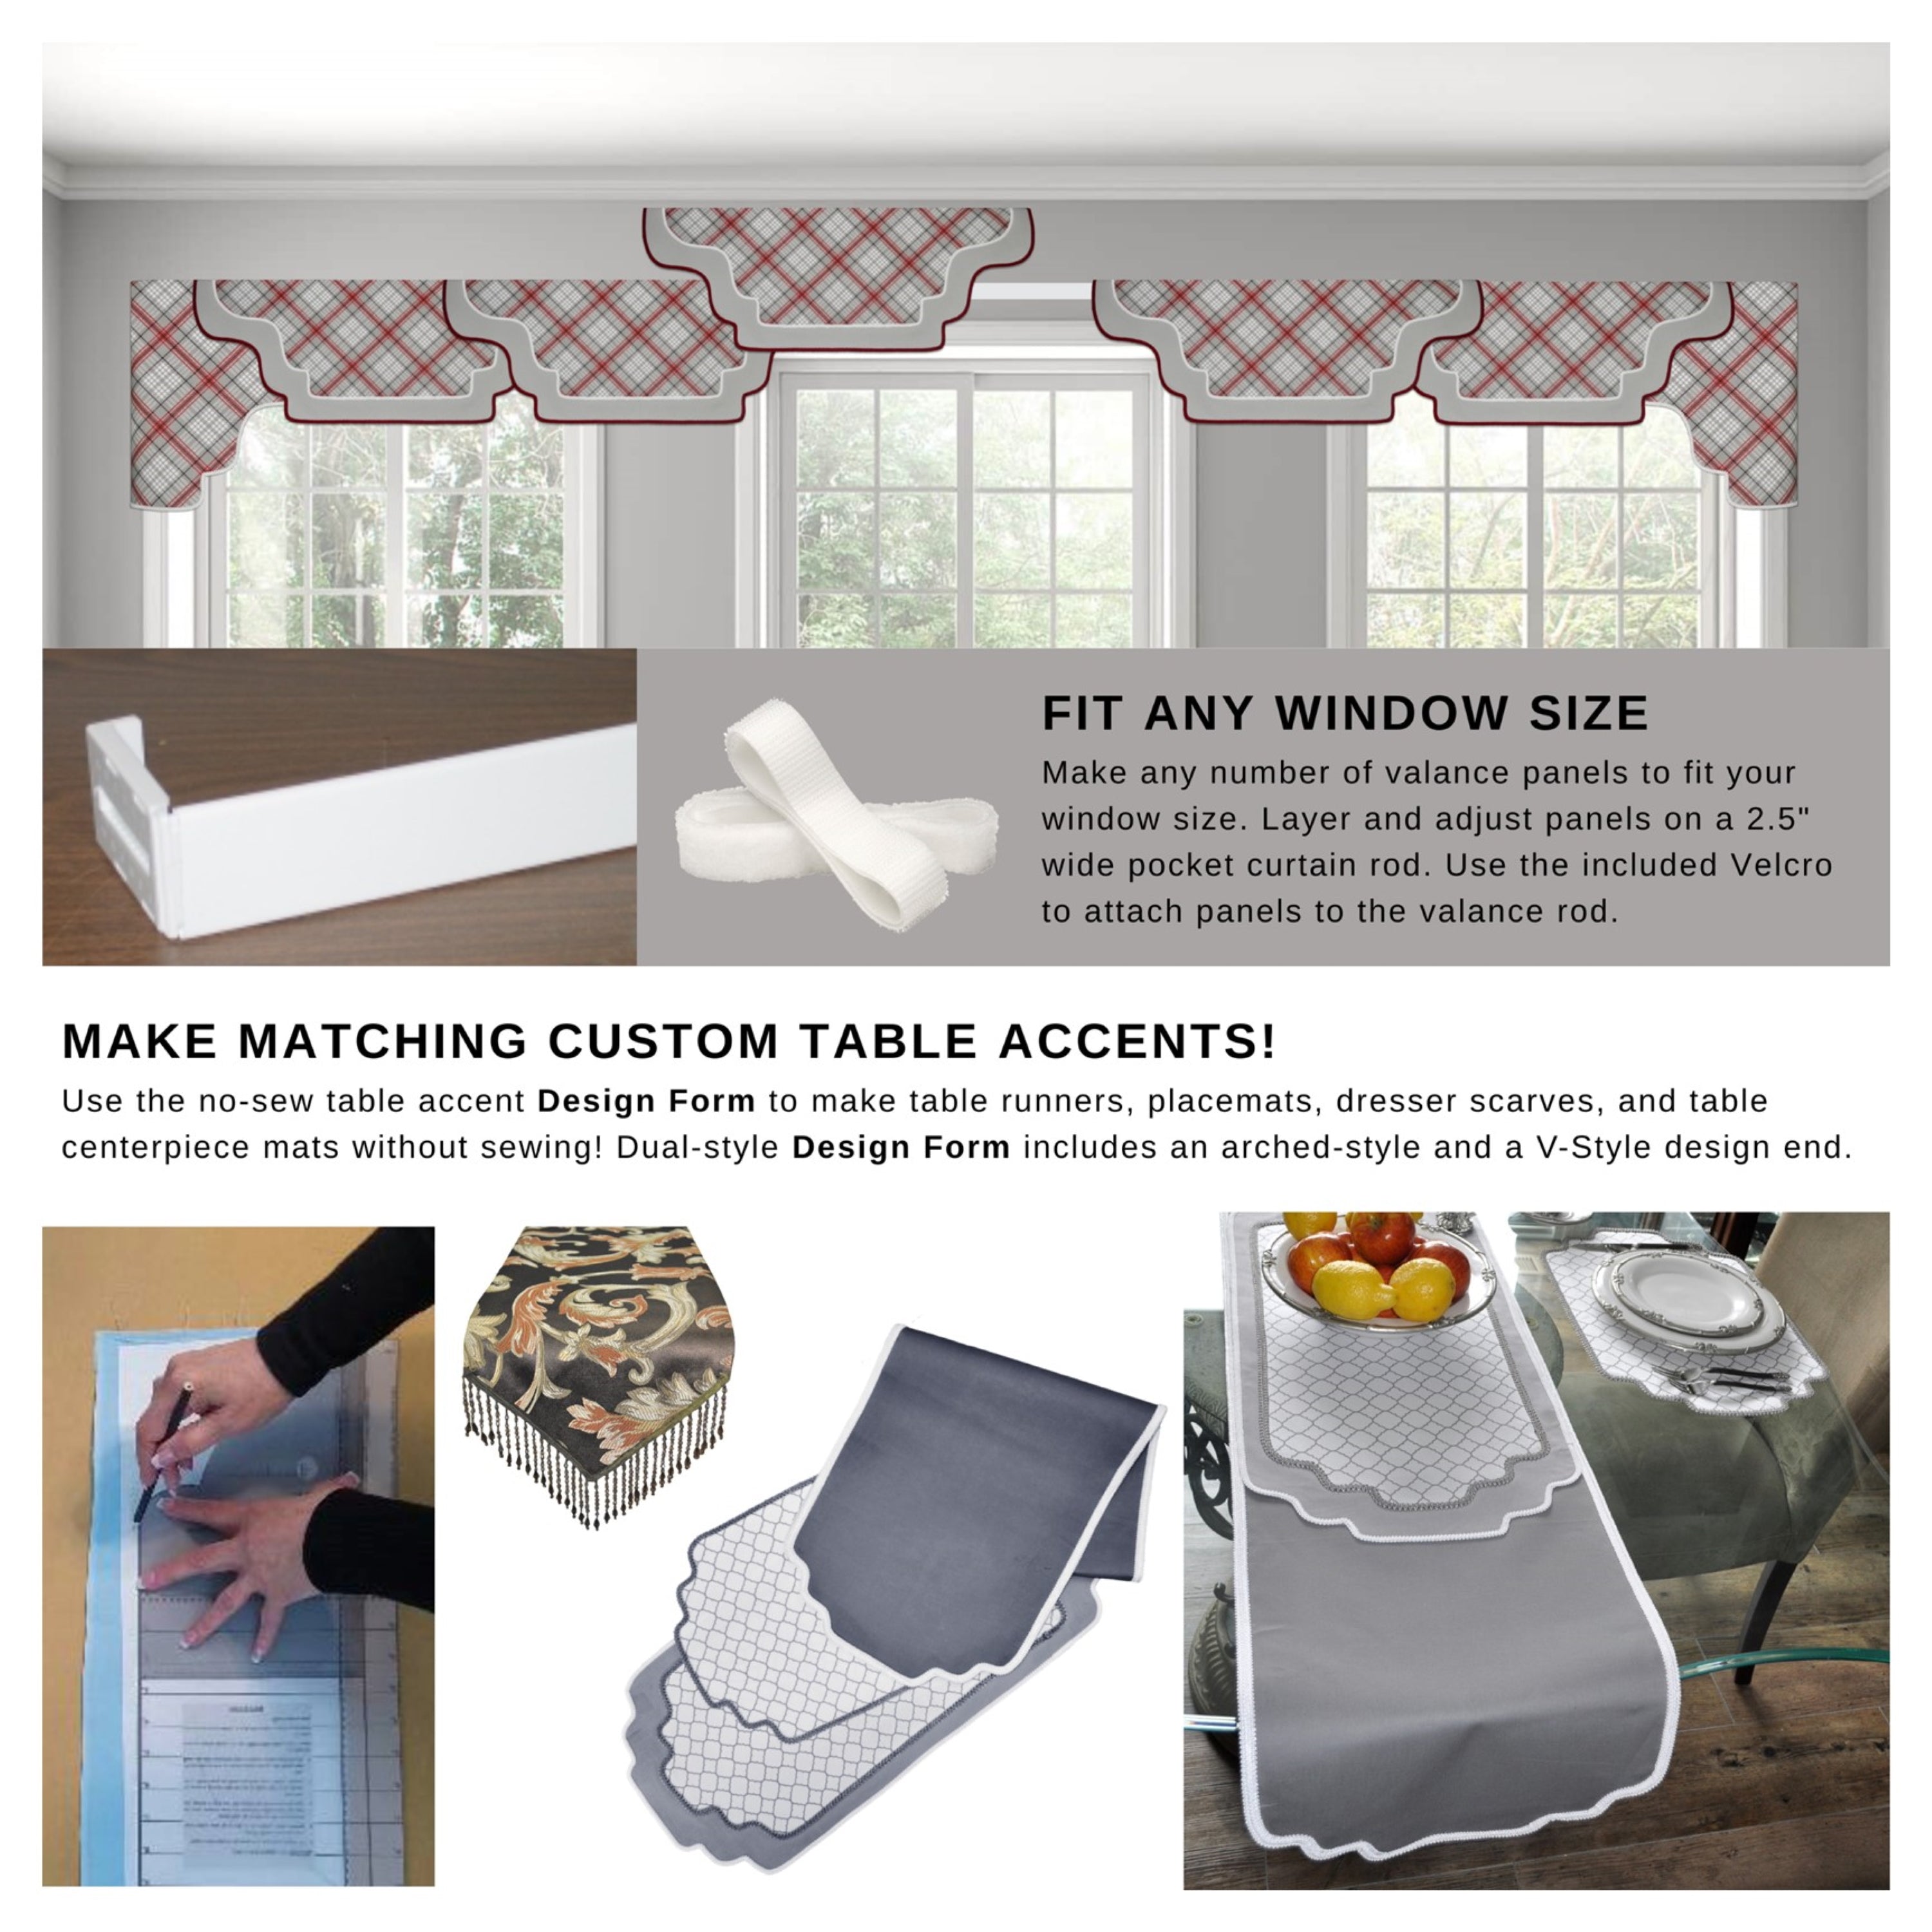 Traceable Designer No-Sew Arched Style Cornice Valance & Table Decorating Kit for DIY Home Decorating